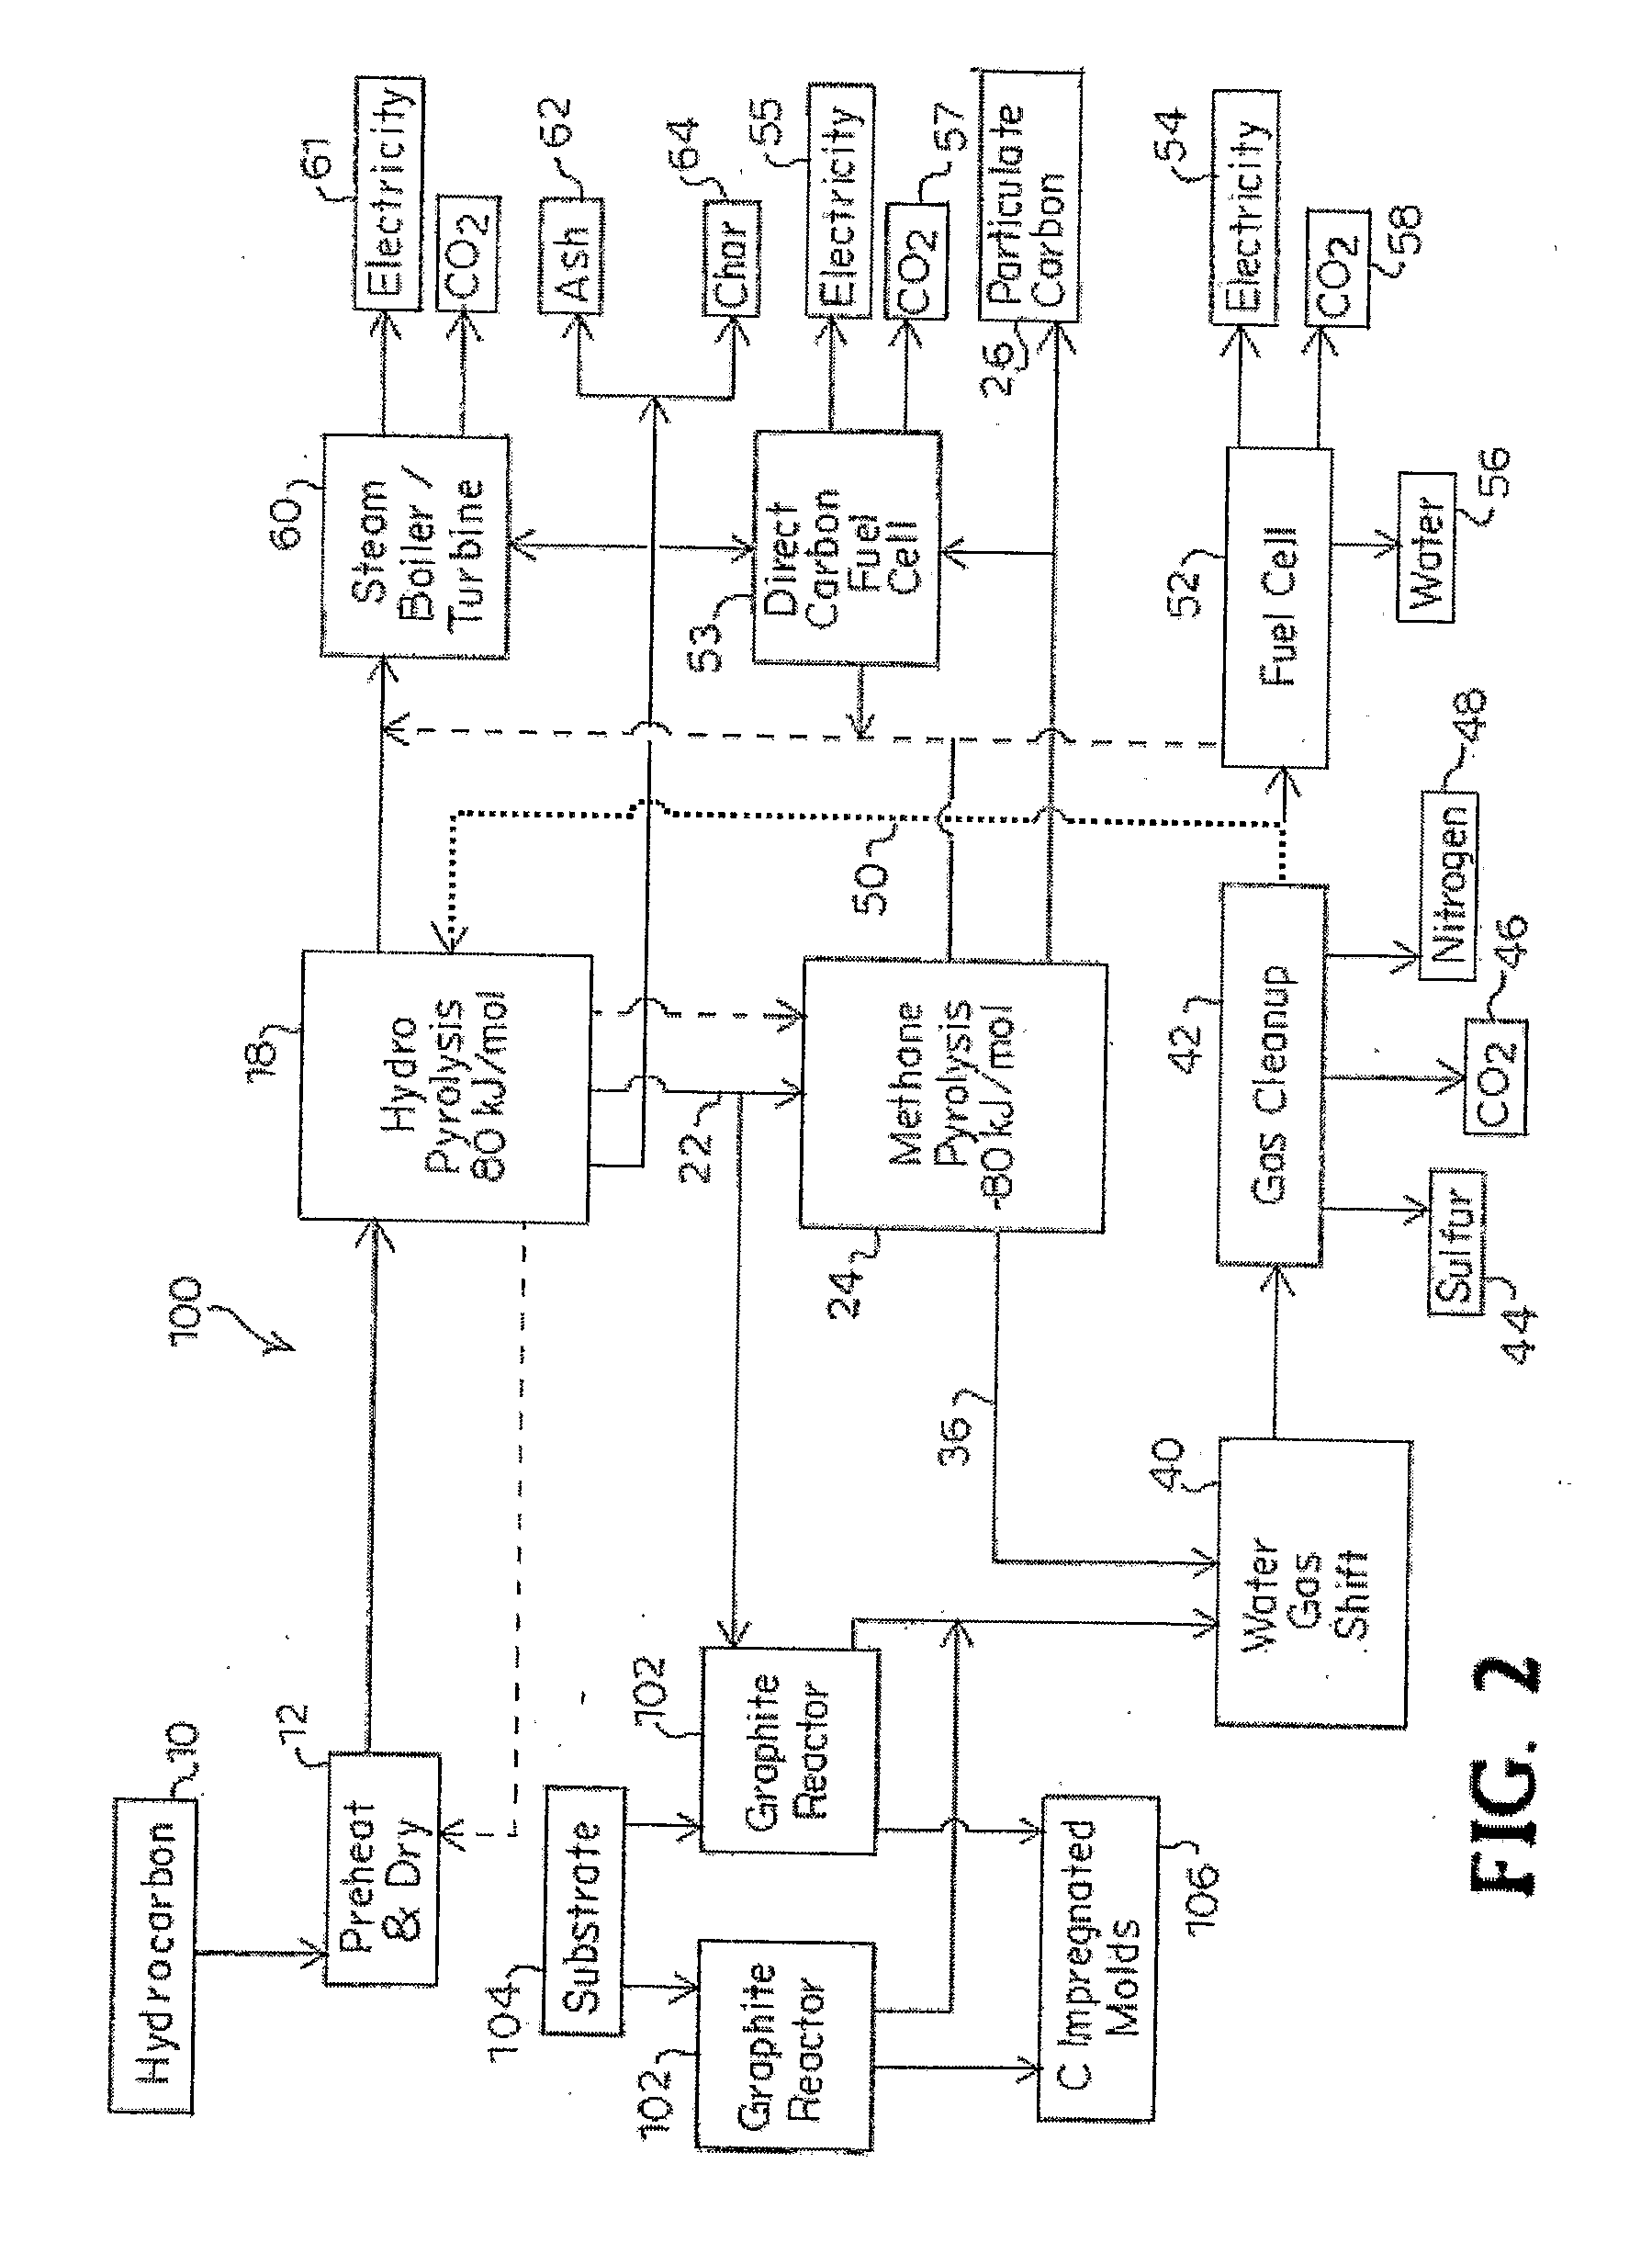 System and method for conversion of hydrocarbon materials